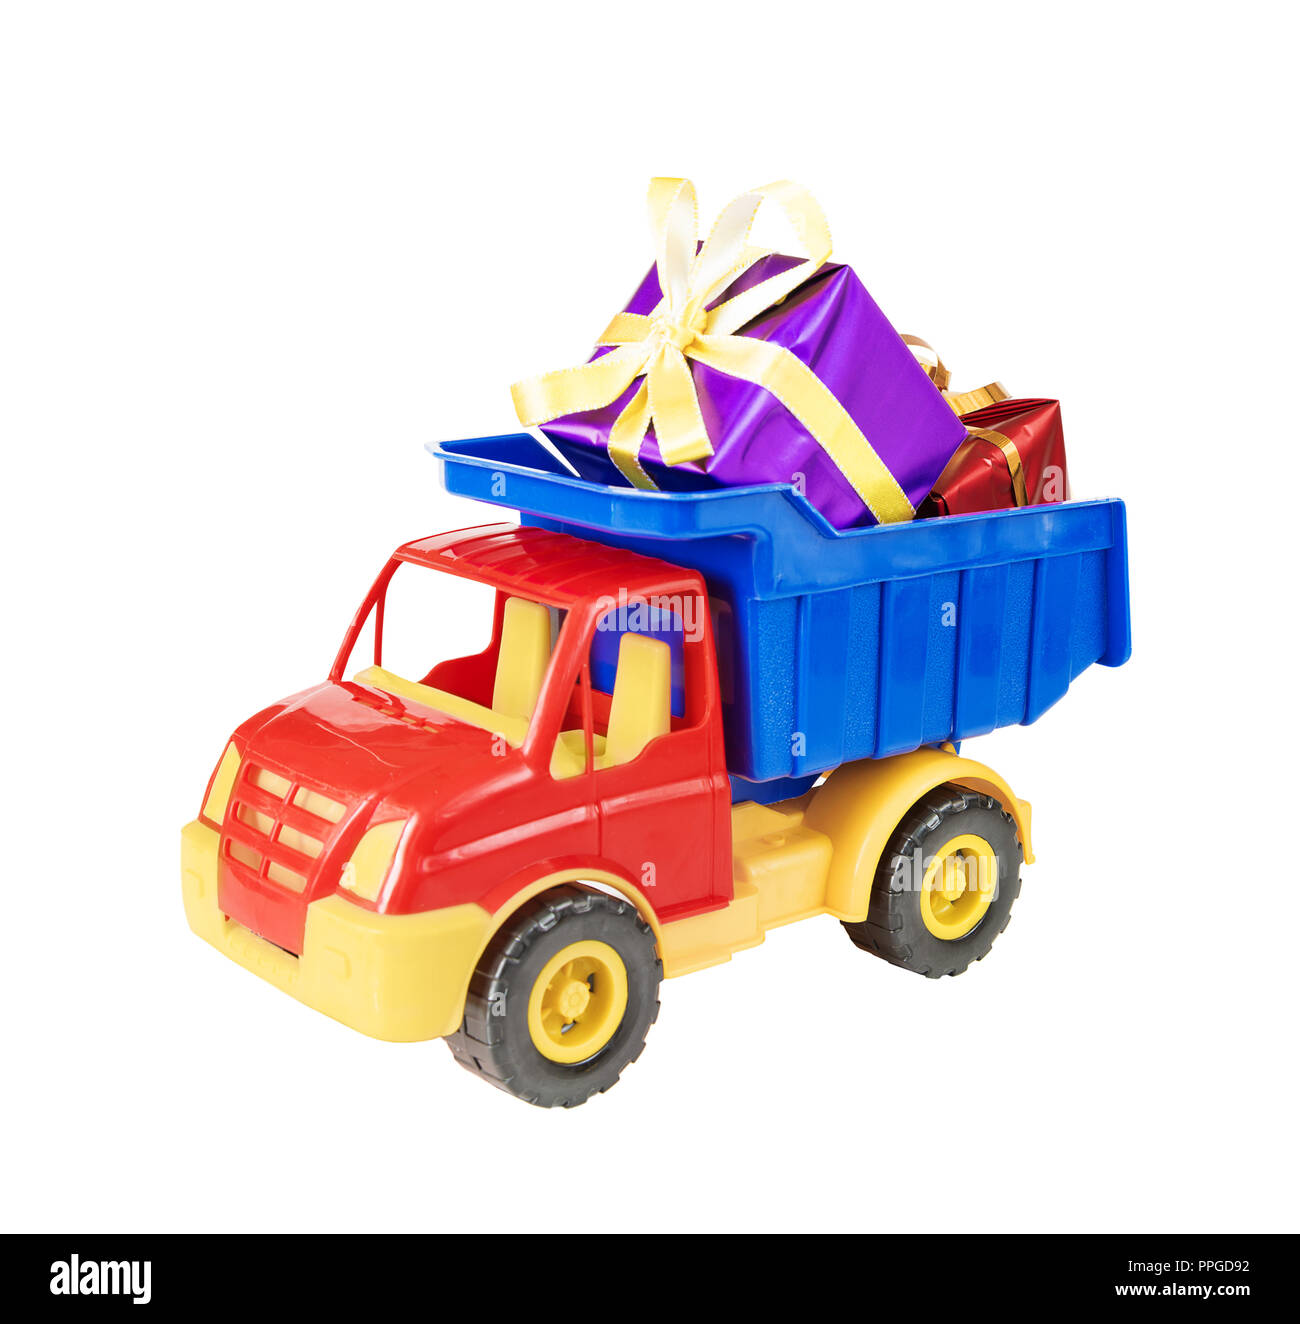 Multicolored plastic toy truck carries gift boxes tied with decorative ribbons in body,  isolated on white background Stock Photo